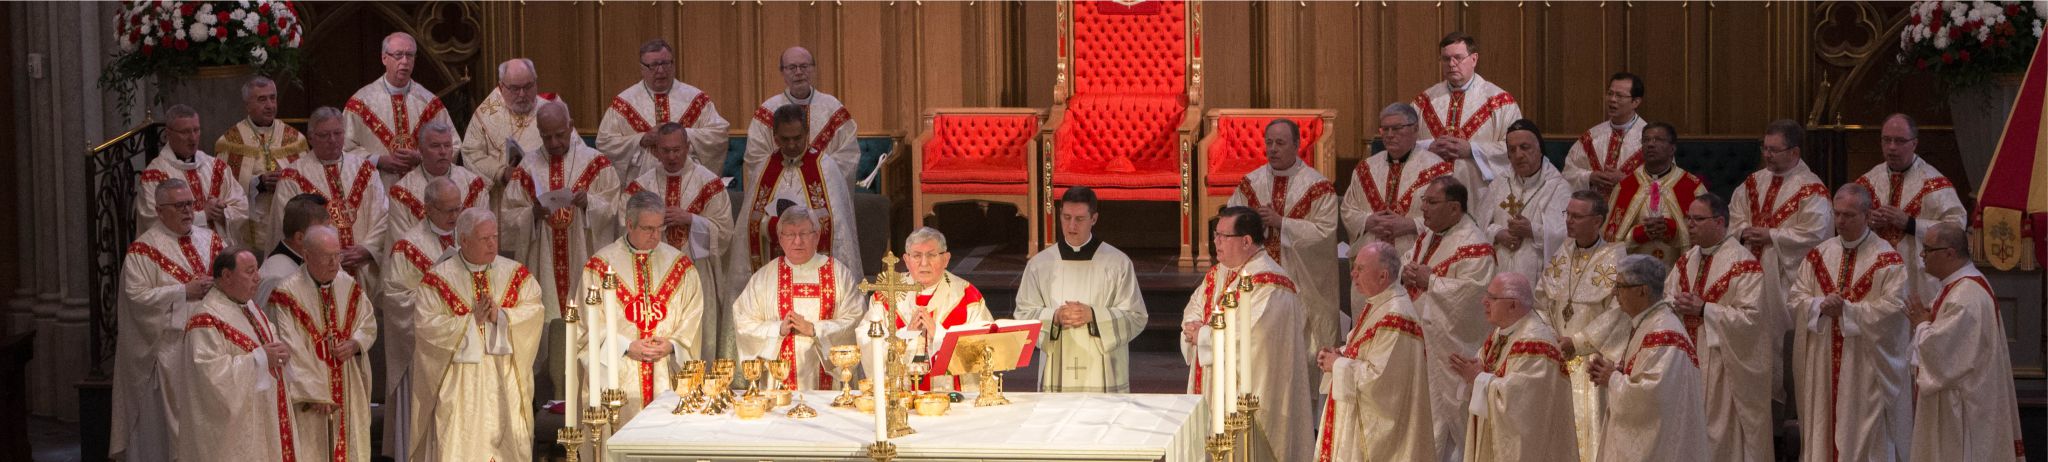 Image from Mass Celebrating 175th Anniversary of the Archdiocese of Toronto